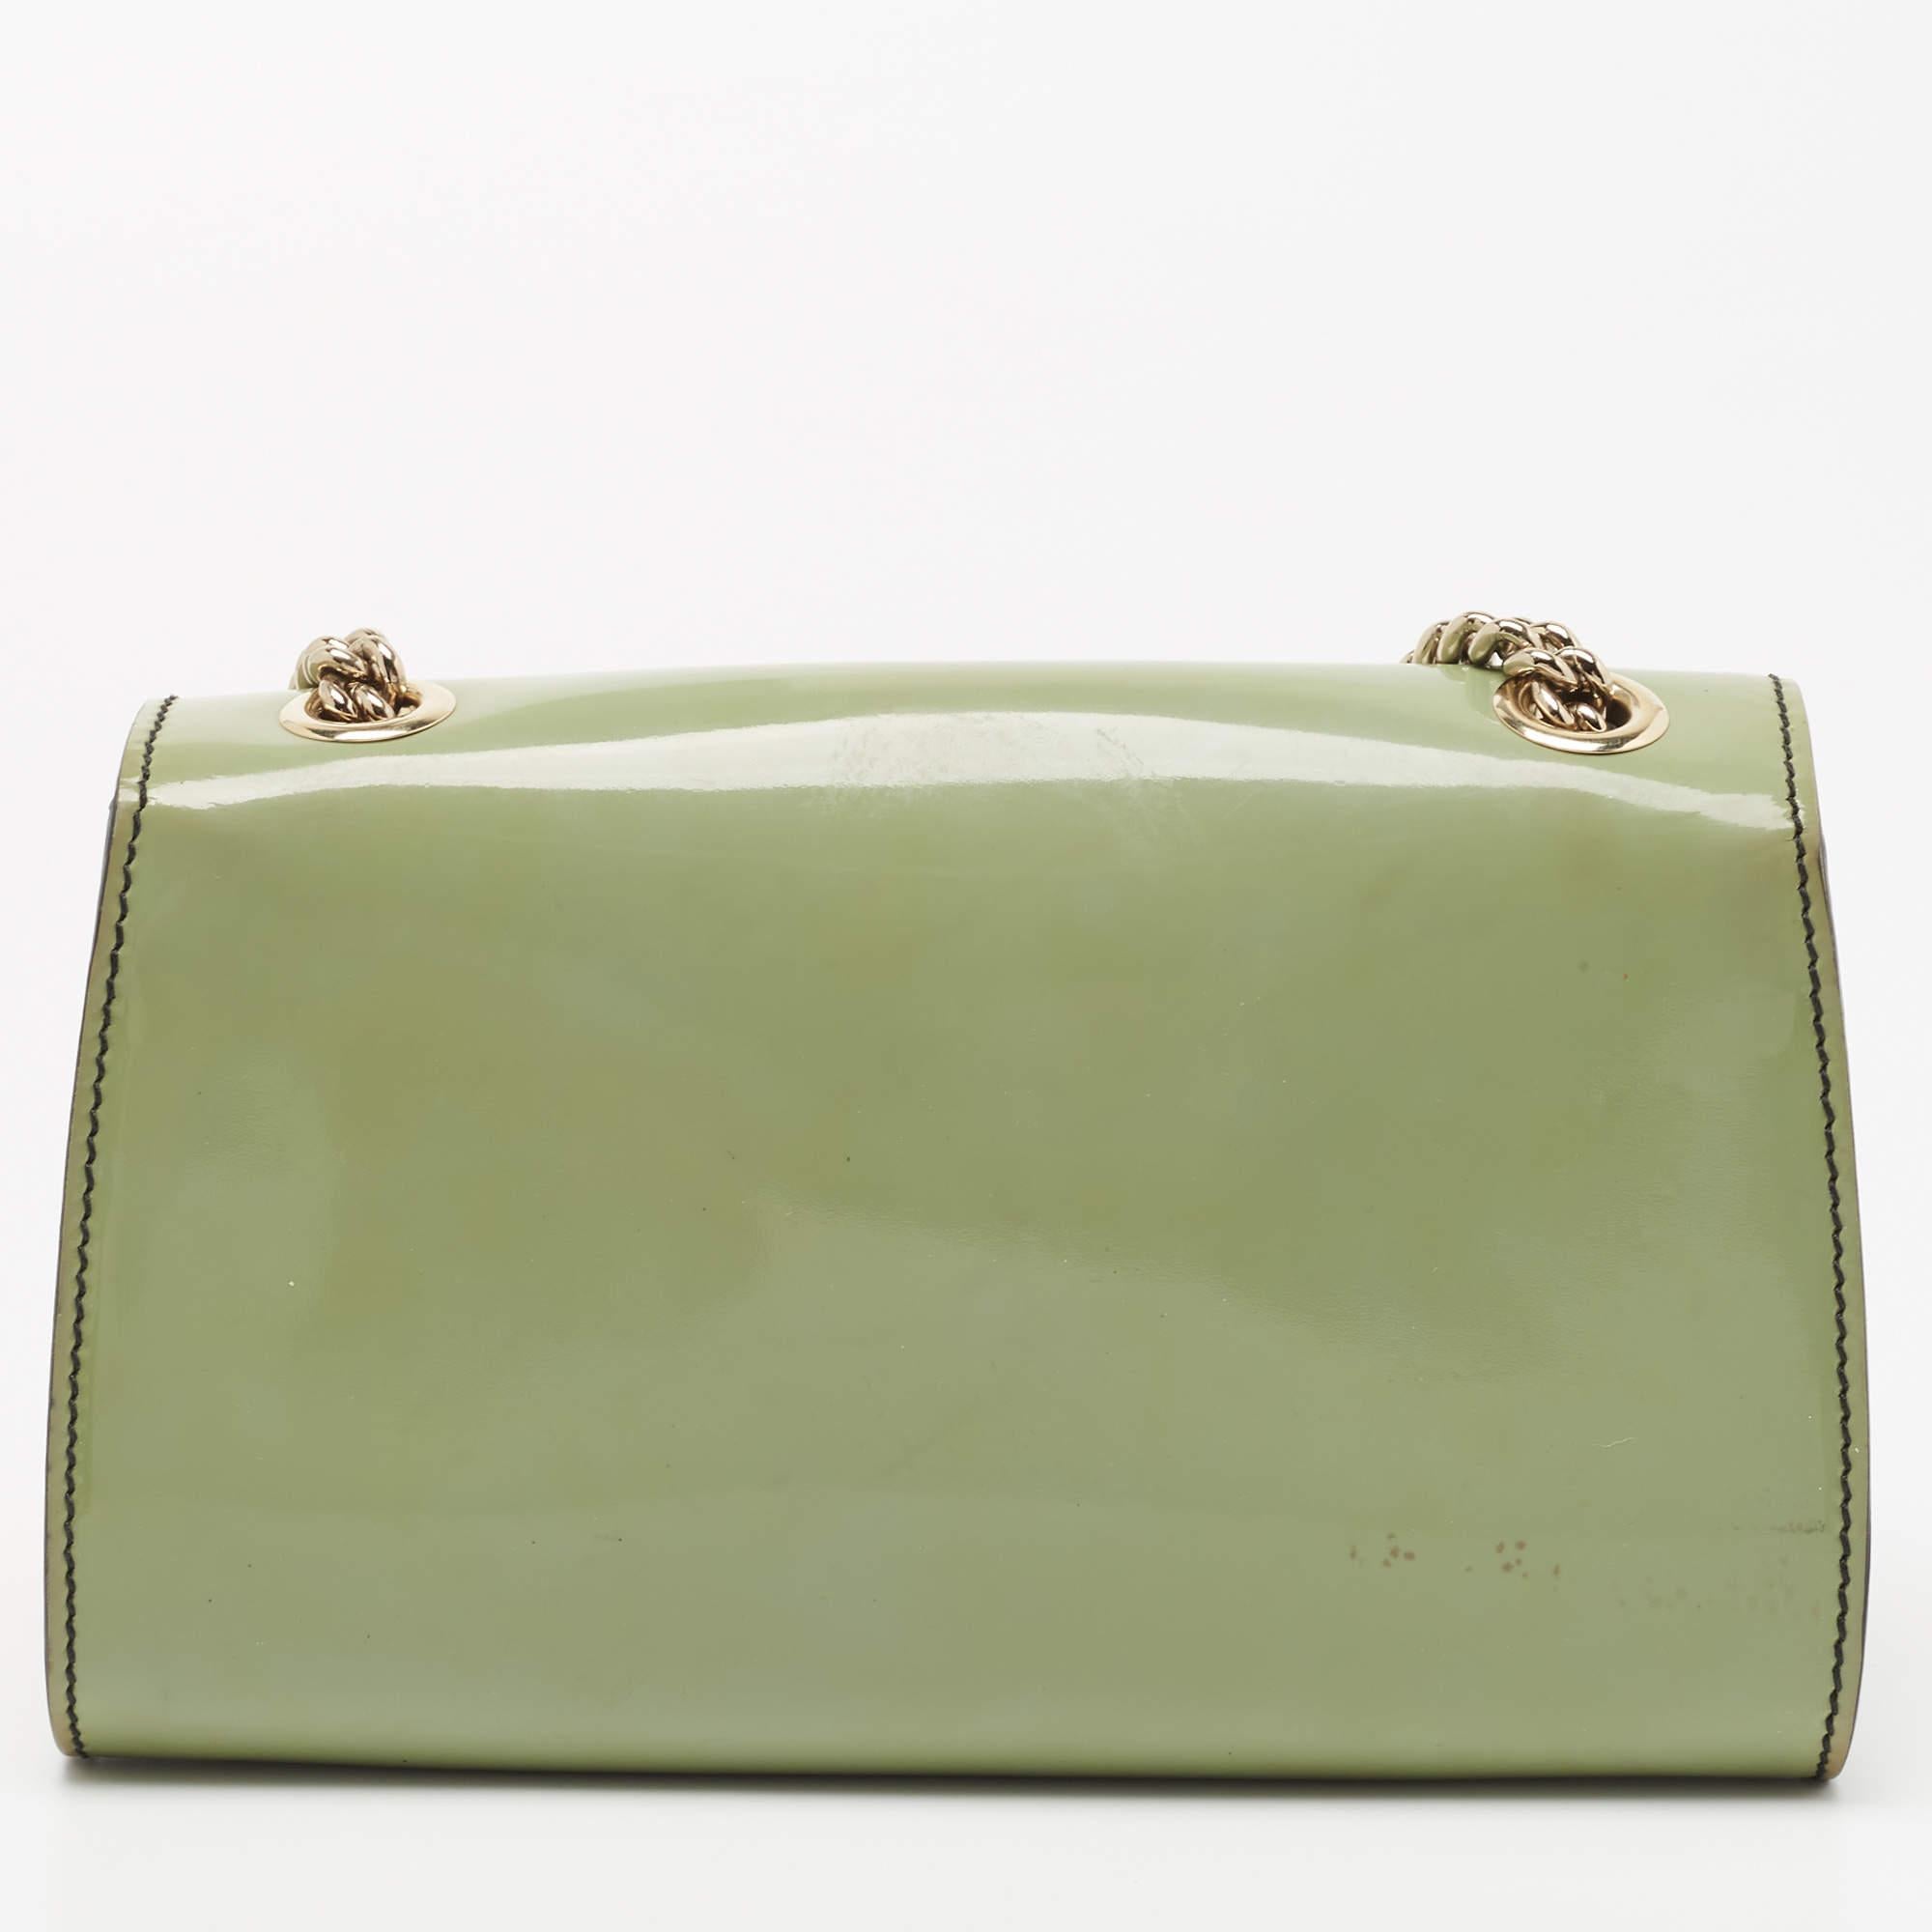 Brown Gucci Light Green Patent Leather Emily Shoulder Bag